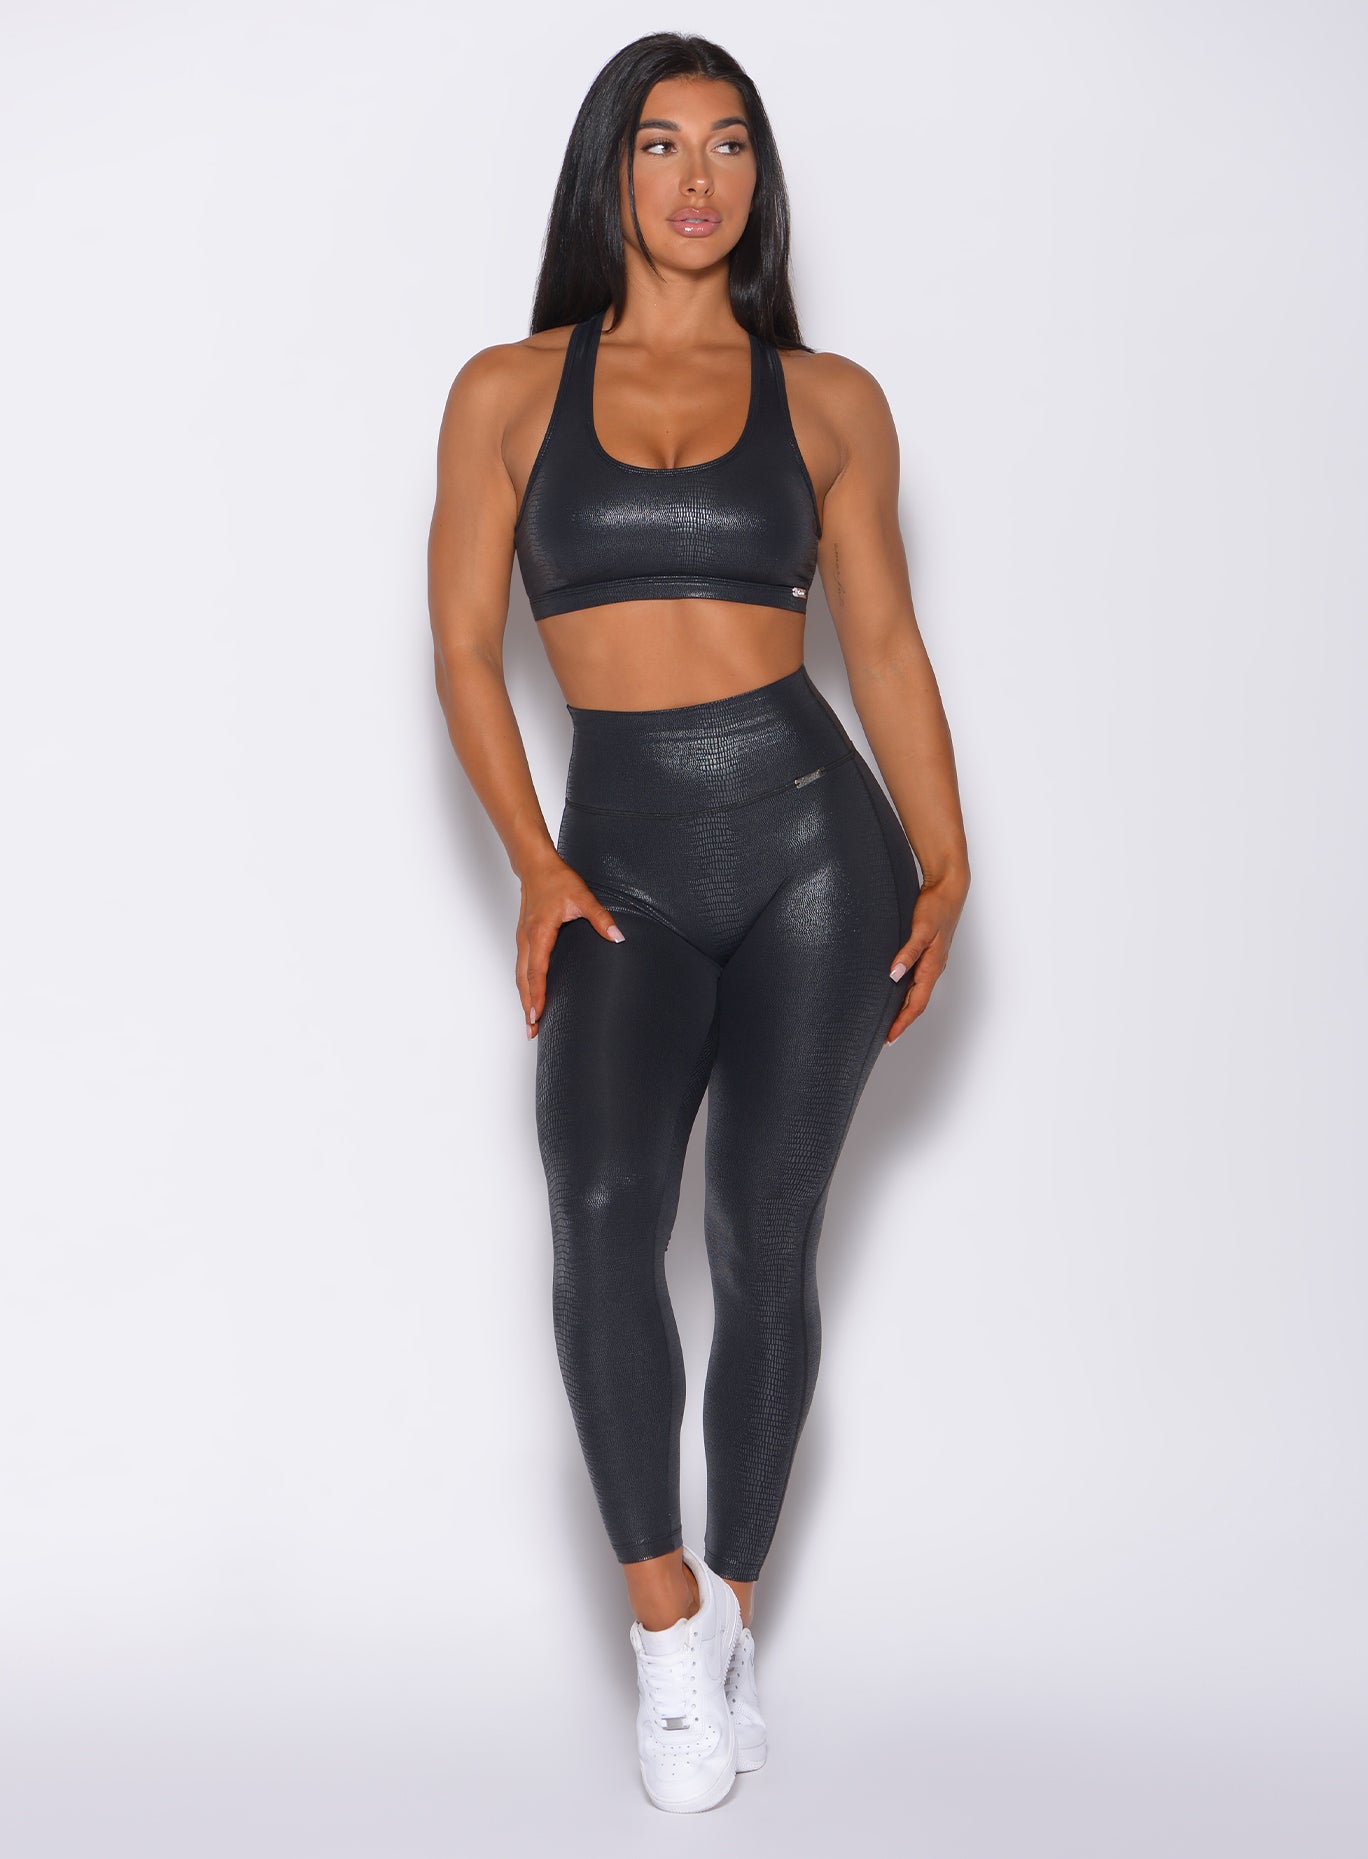 Front profile view of a model wearing our shine leggings in black python color and a matching sports bra